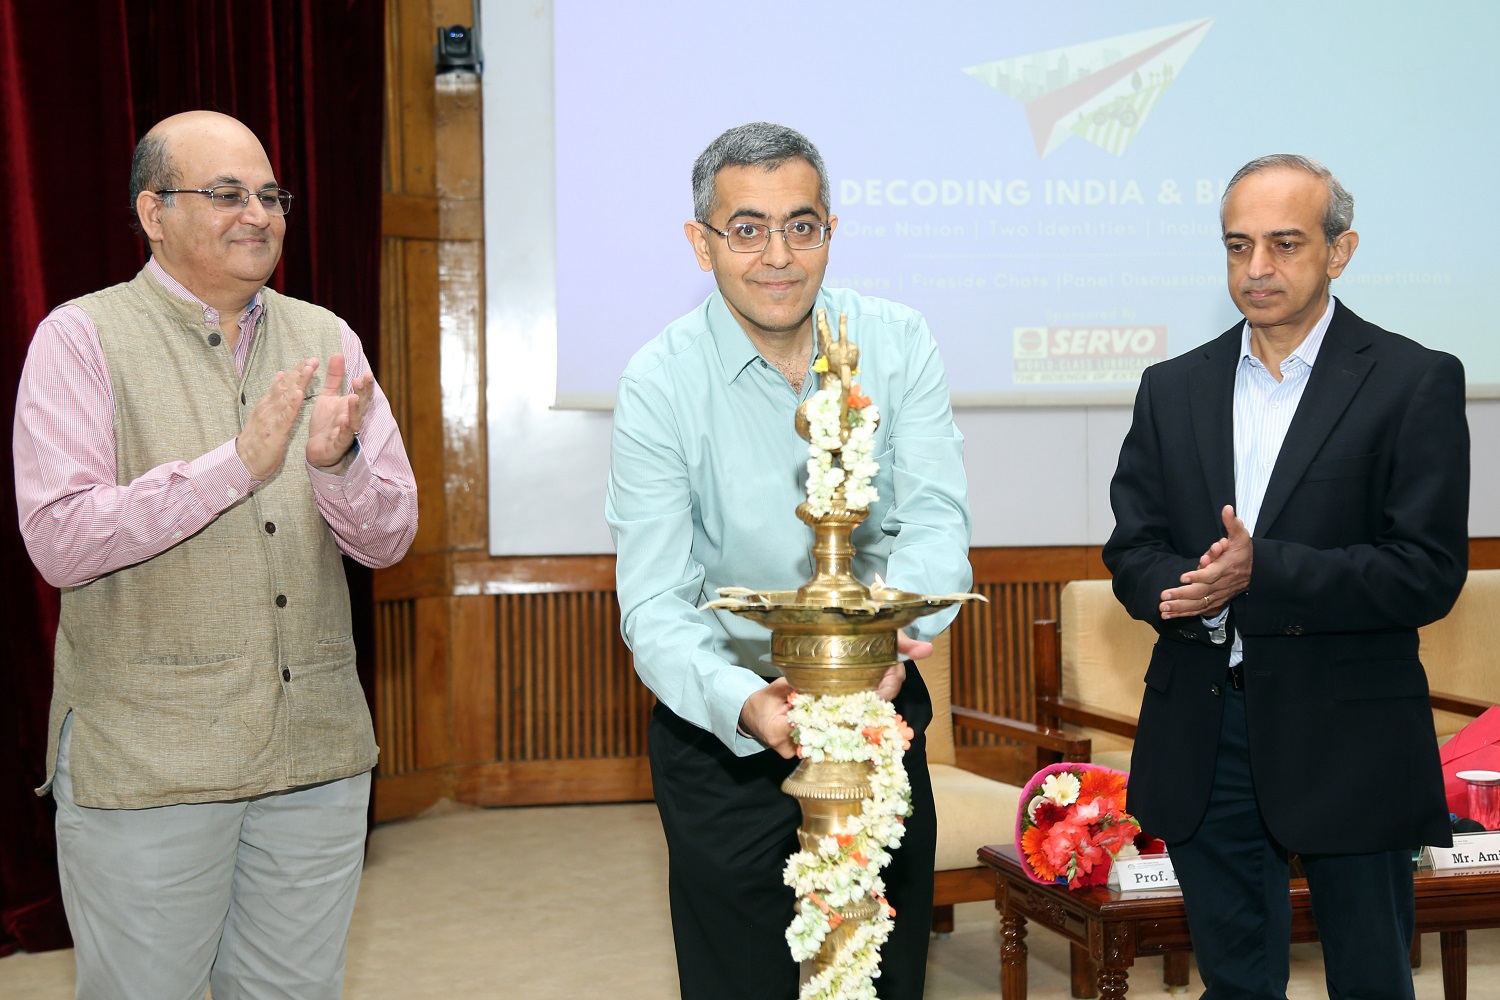 Amit Sharma, Managing Partner, Global Delivery, IBM, inaugurates EPGP Business Conclave 2022 on ‘Decoding India & Bharat’ on 18th September. Professor Rishikesha T Krishnan, Director, IIM Bangalore, and Professor Ashok Thampy, Chairperson, EPGP, addressed the participants.